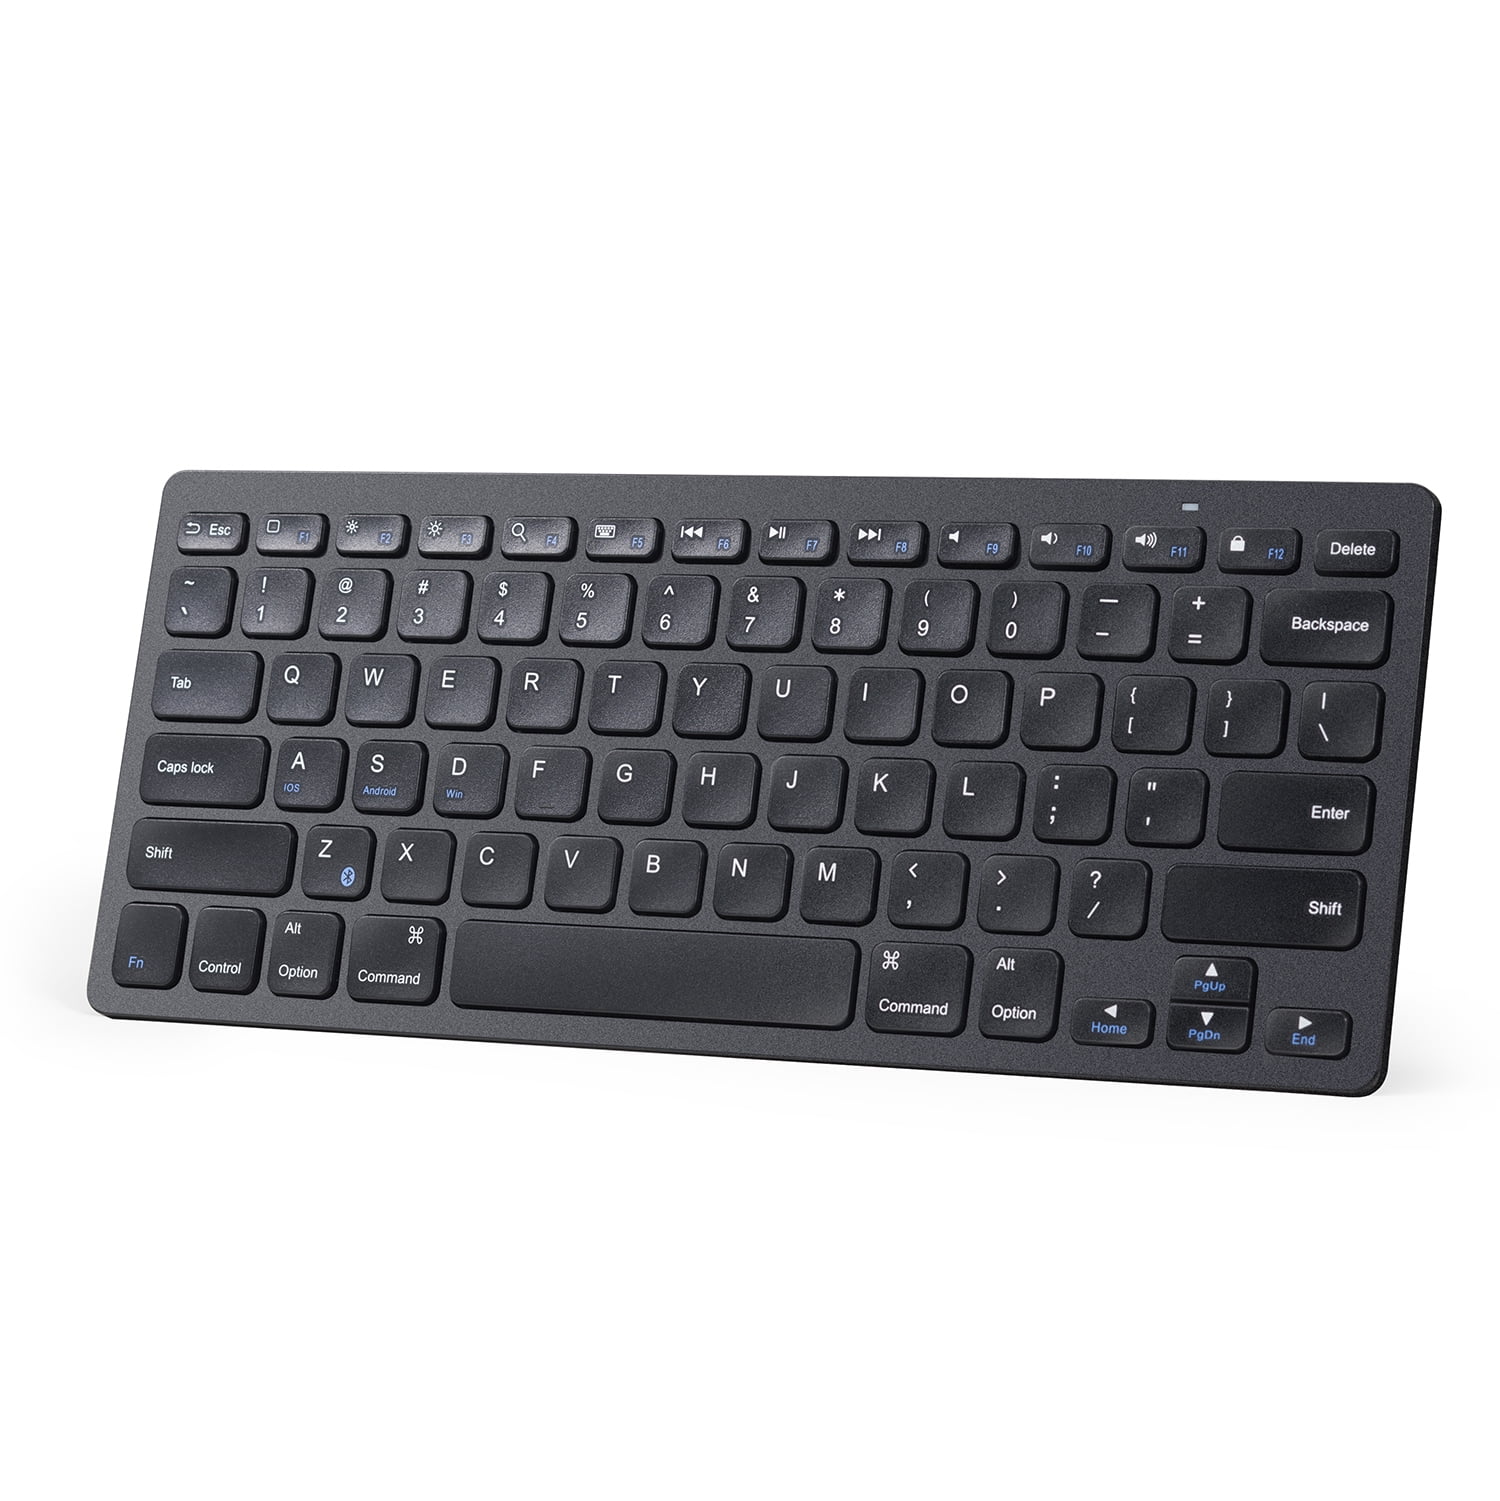 Anker Bluetooth Ultra-Slim Keyboard for iPad, Galaxy Tabs and Other Mobile Devices, Black